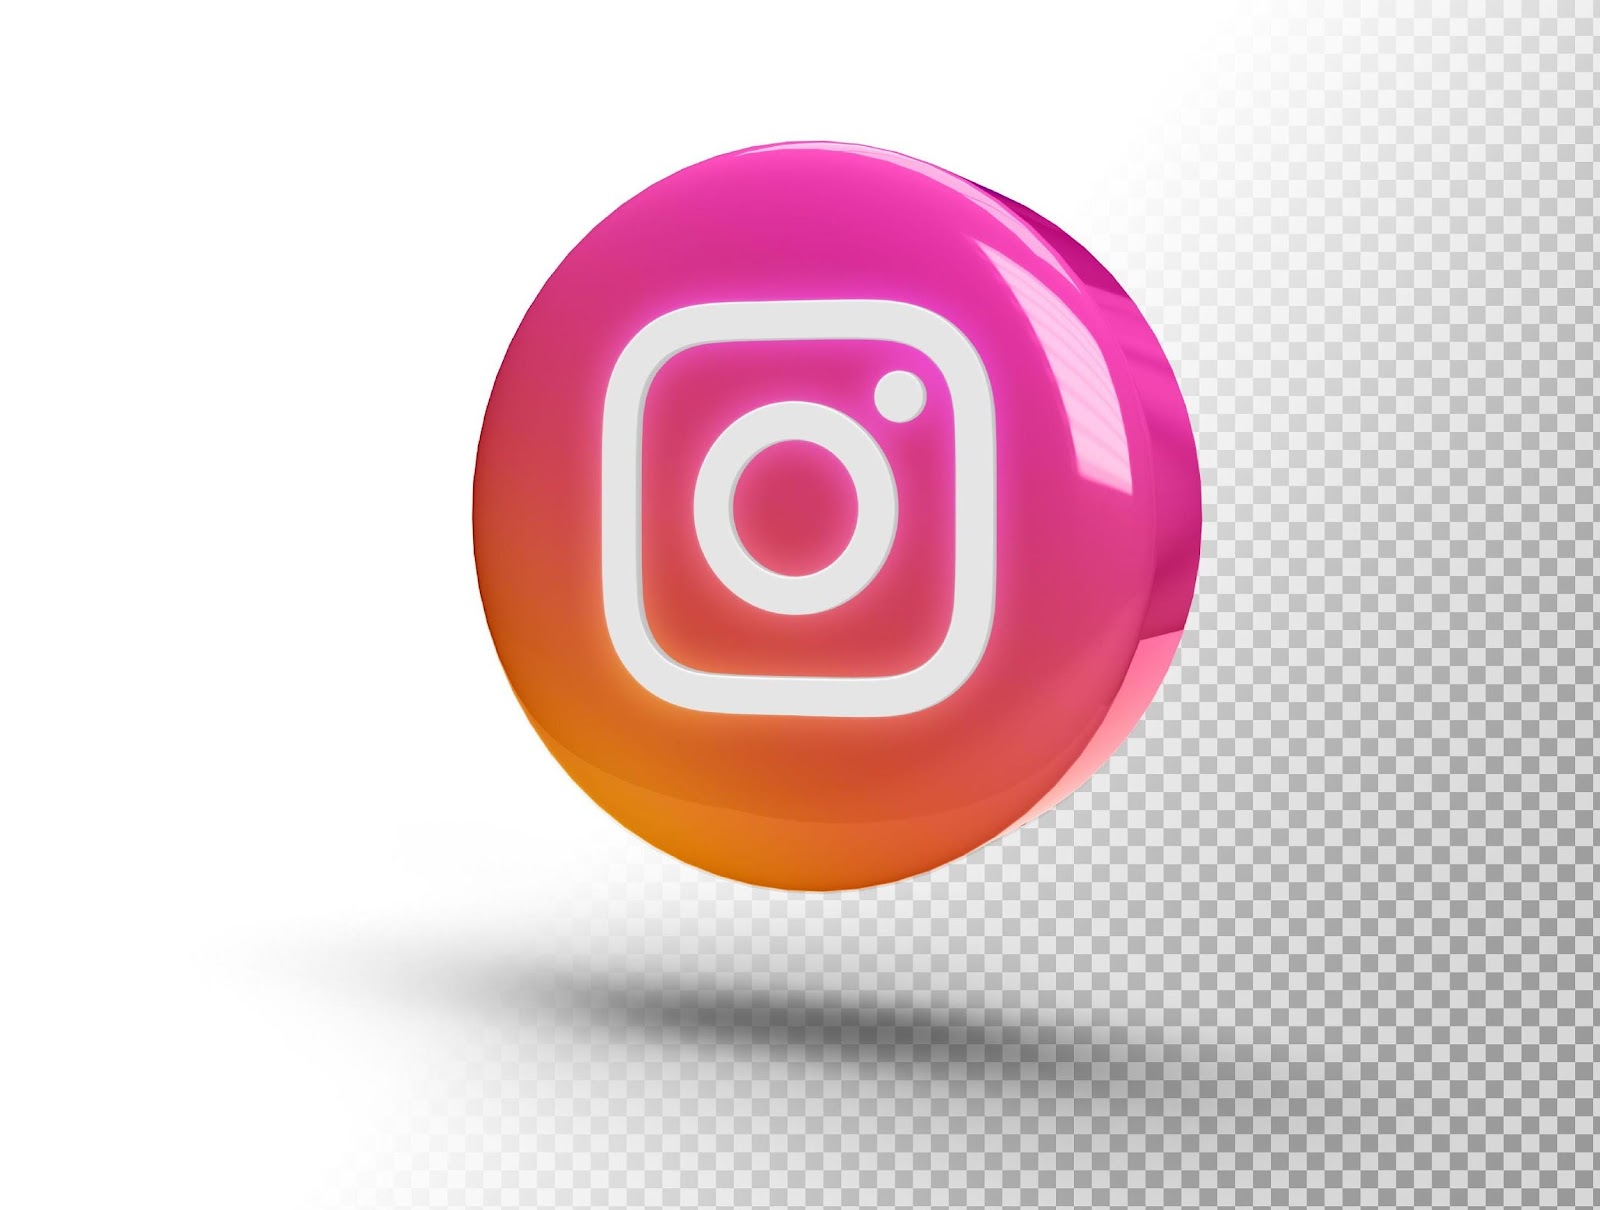 26880010_glowing_instagram_logo_on_a_realistic_3d_circle